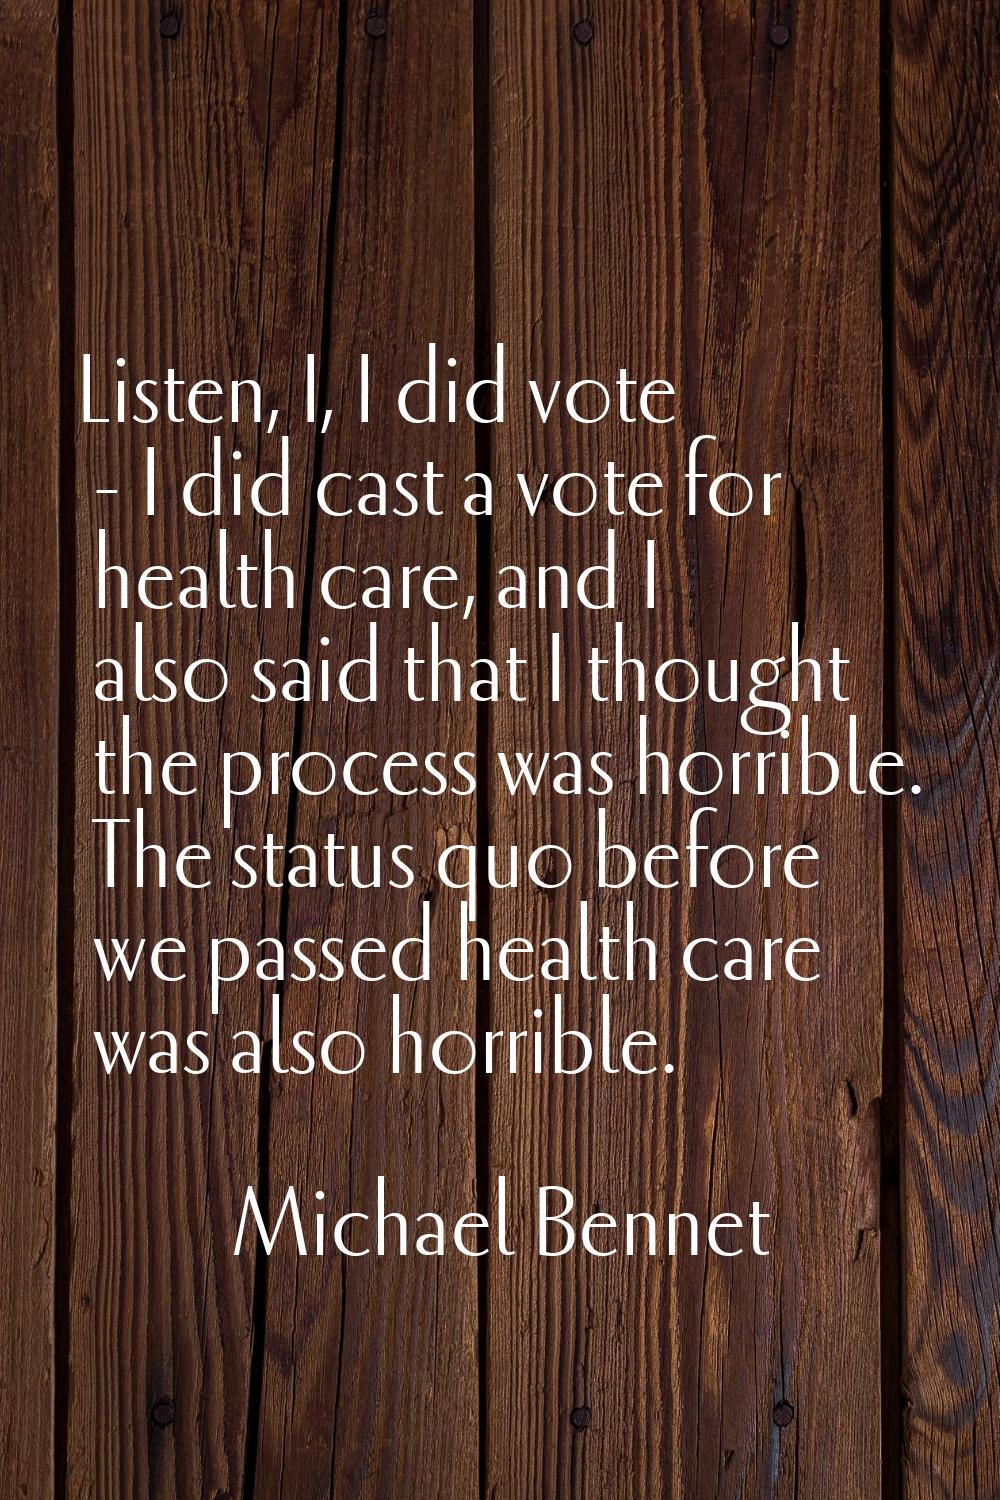 Listen, I, I did vote - I did cast a vote for health care, and I also said that I thought the proce